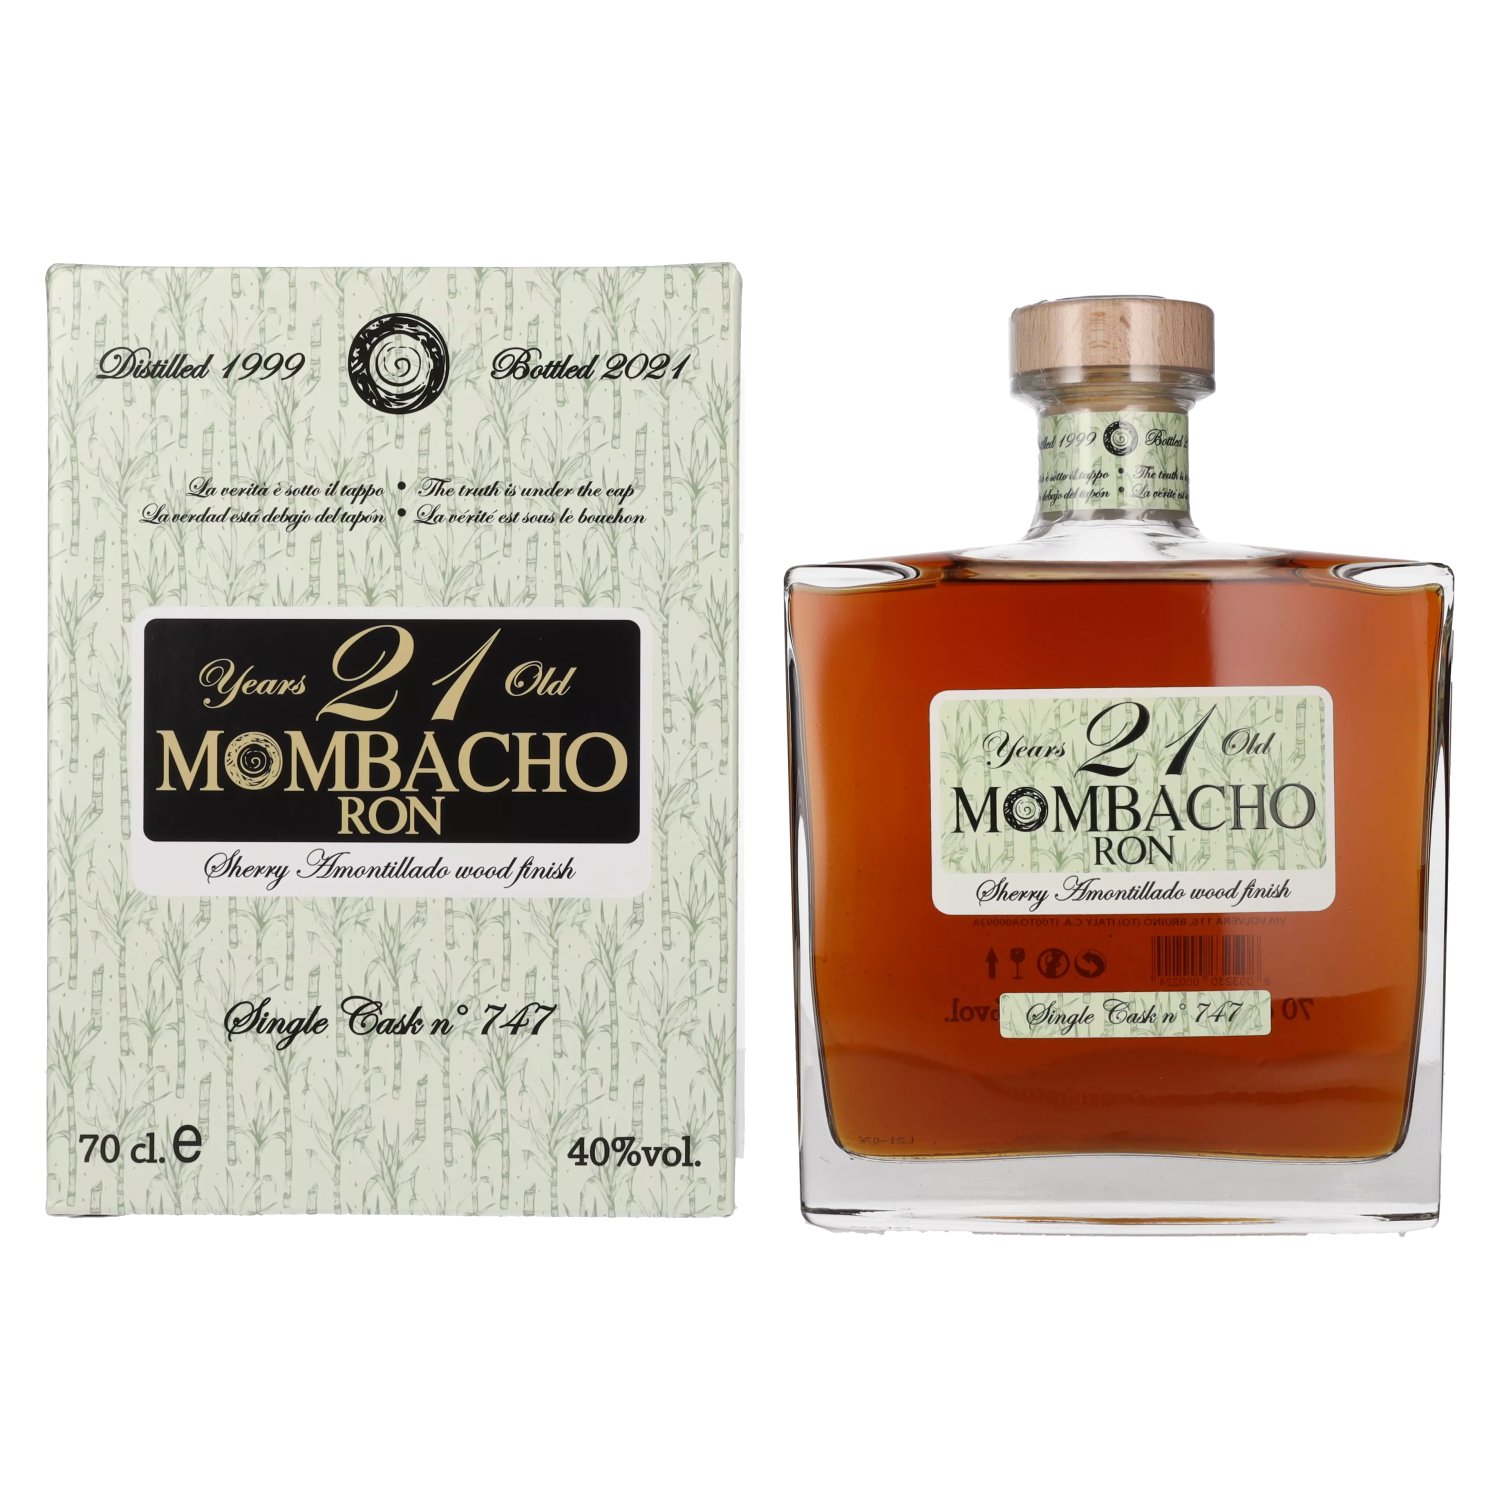 in Wood Sherry Ron Finish Amontillado 40% Vol. Mombacho Giftbox 0,7l Old Years 21